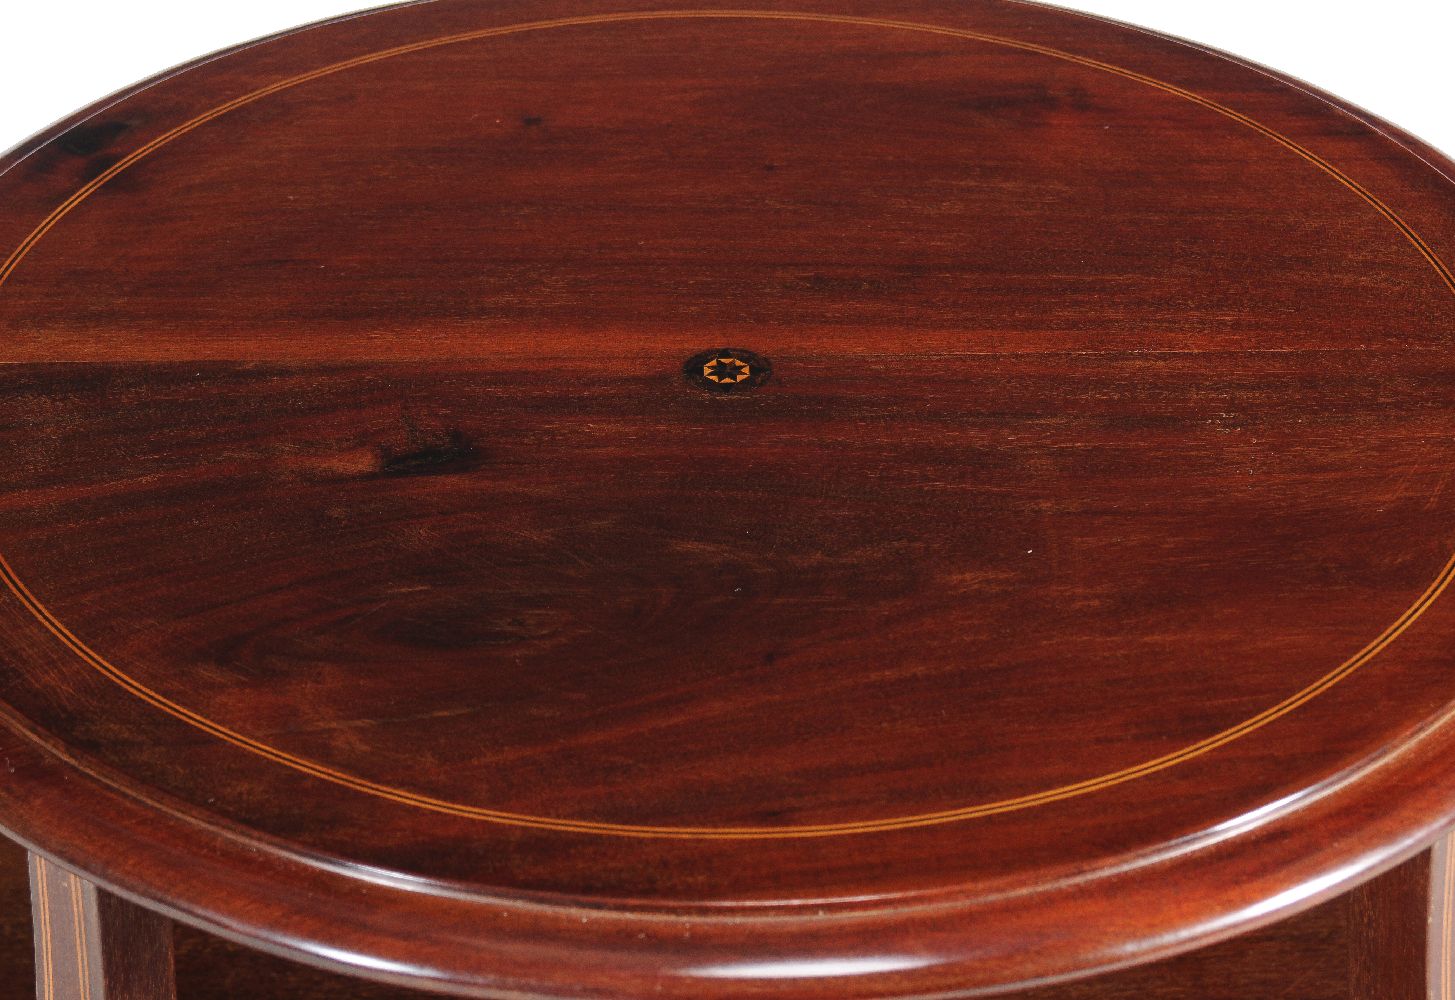 An Edwardian mahogany and inlaid two tier étagère, circa 1905 - Image 2 of 3